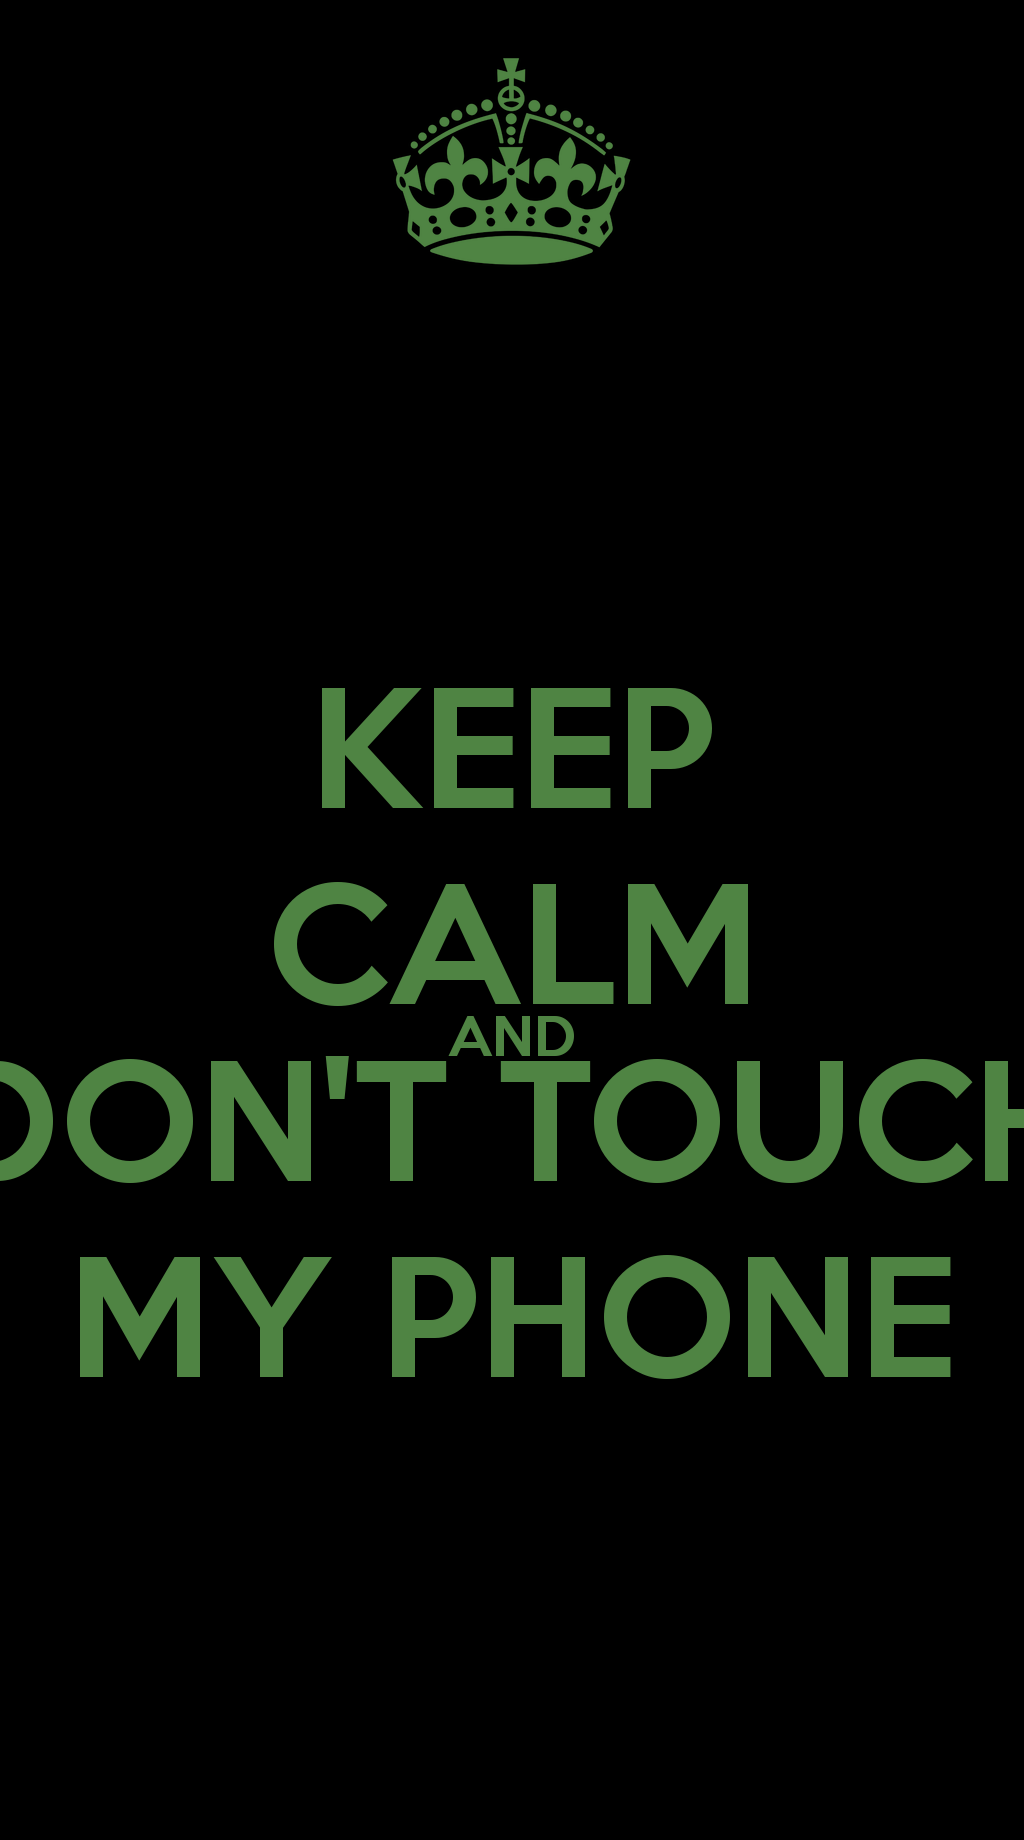 Keep calm and don't touch my phone wallpaper - Don't touch my phone